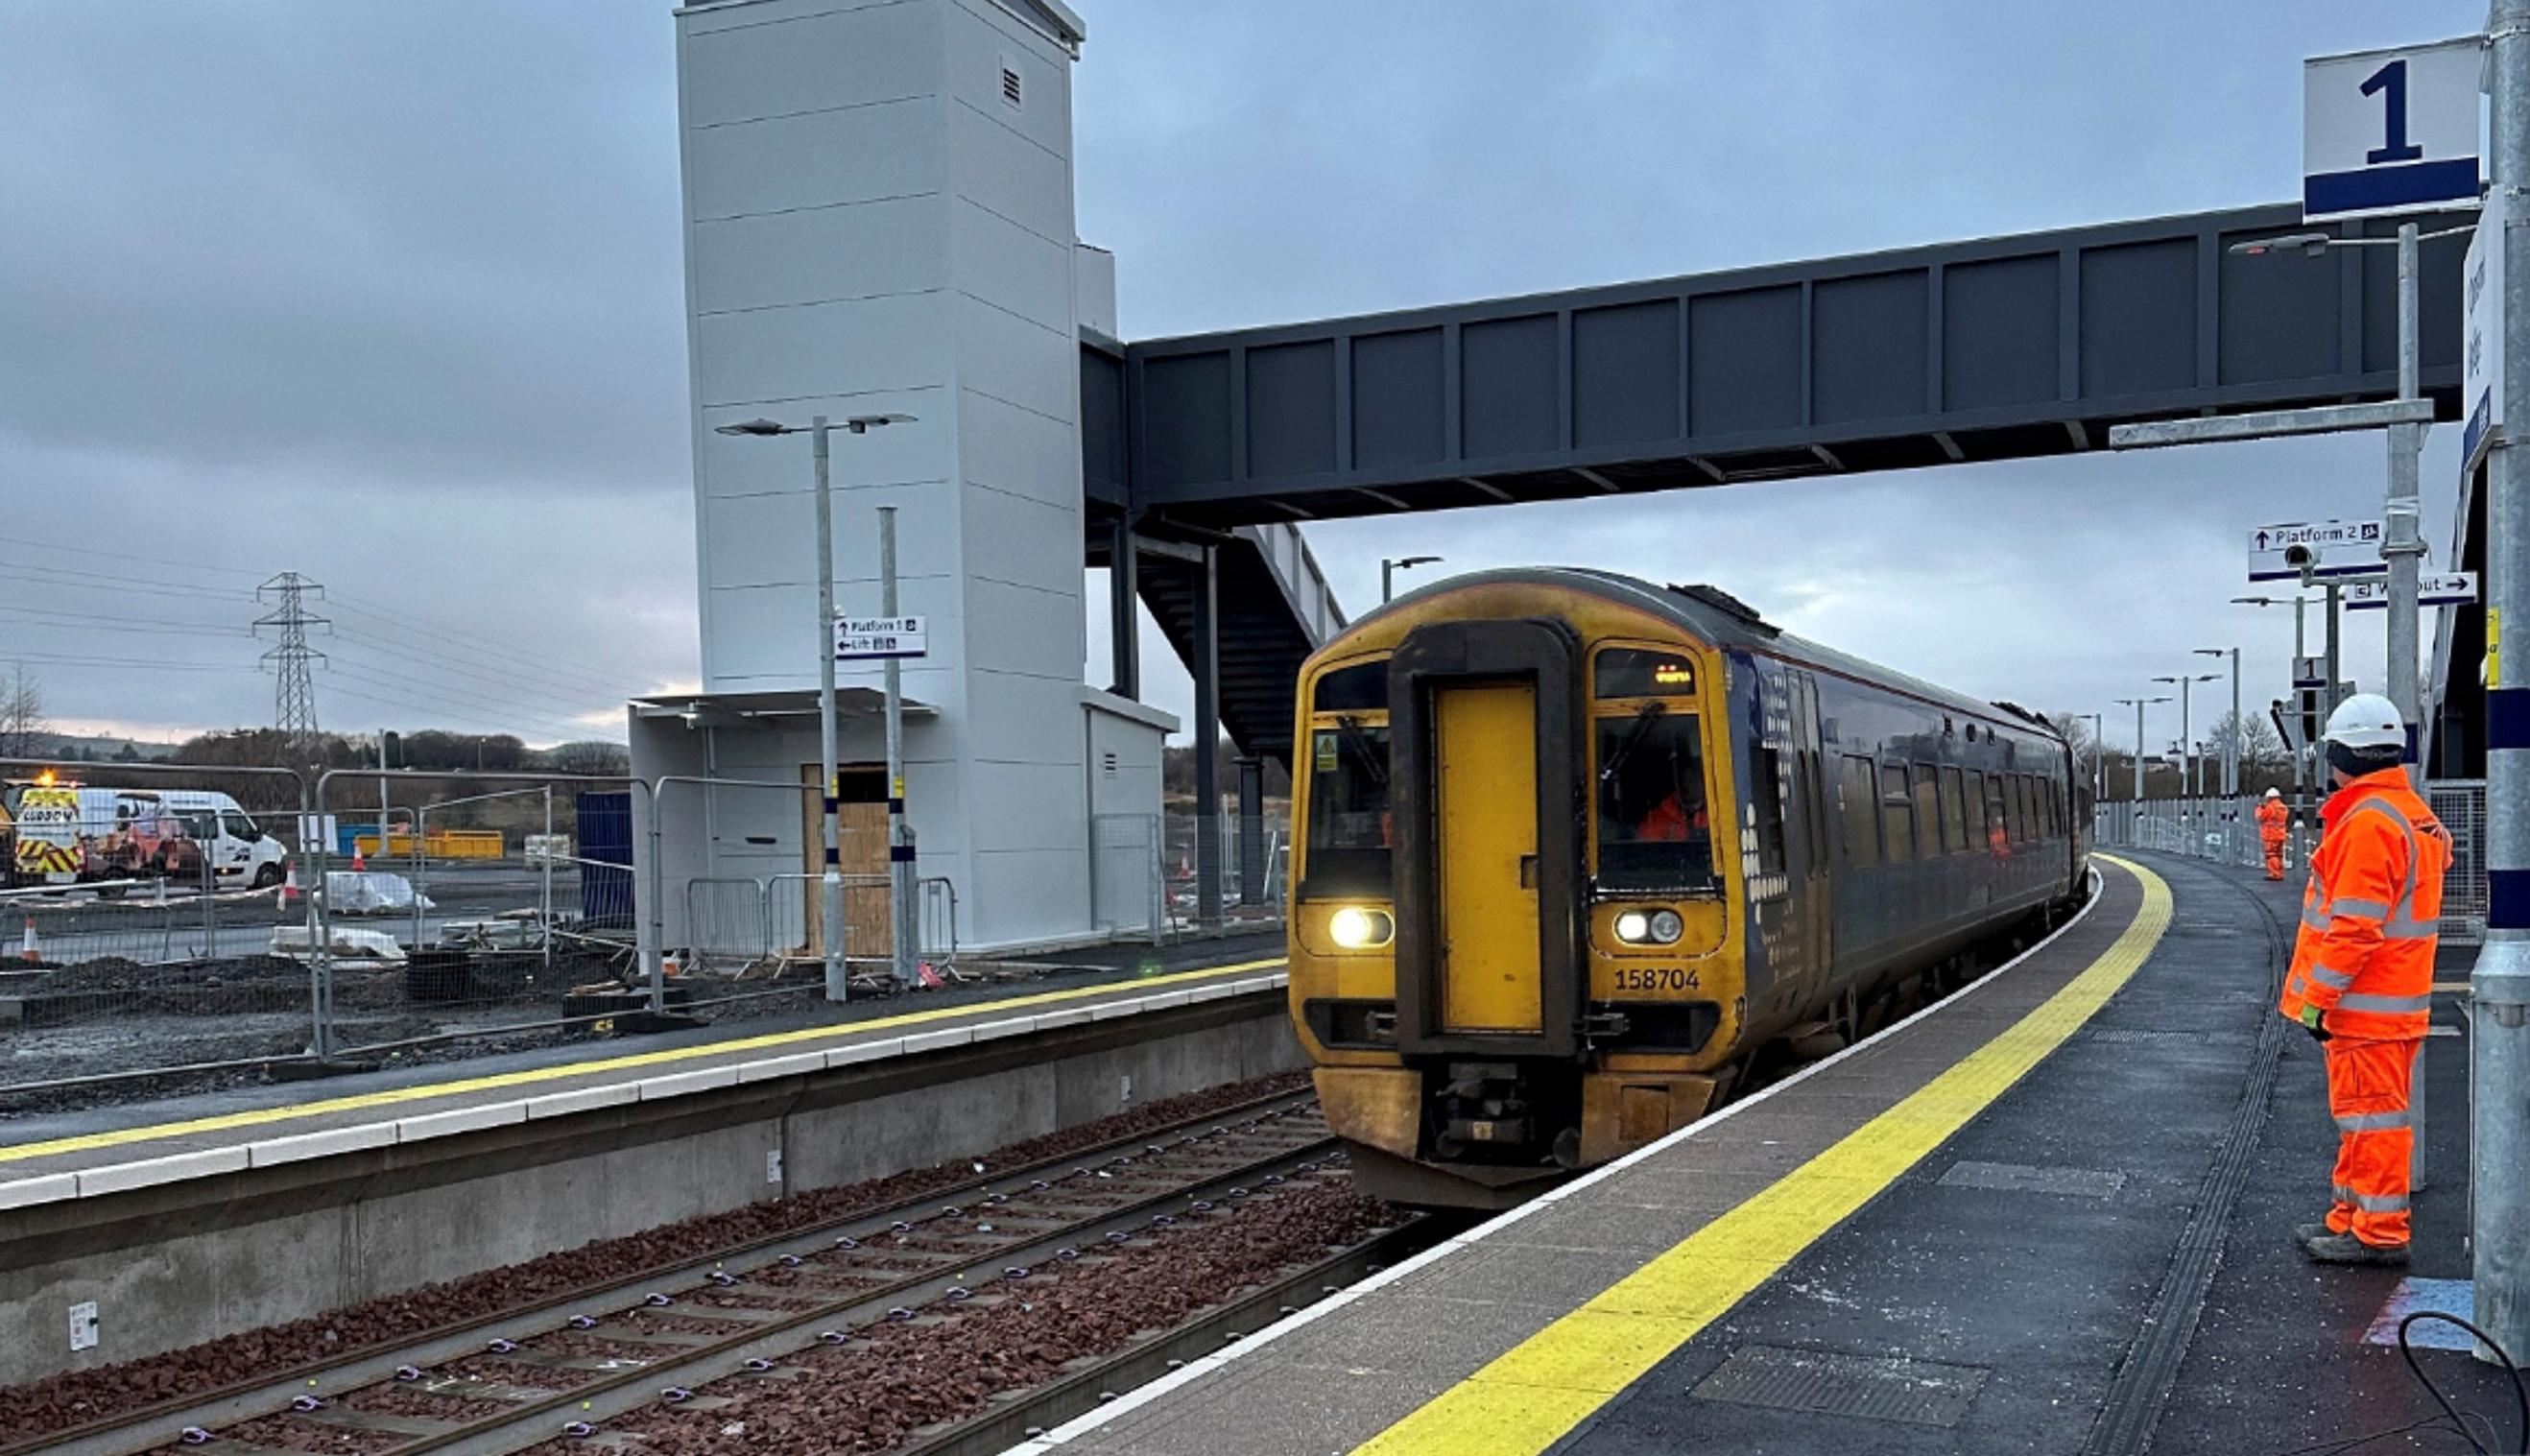 Services return to Levenmouth after £116m investment in rail line